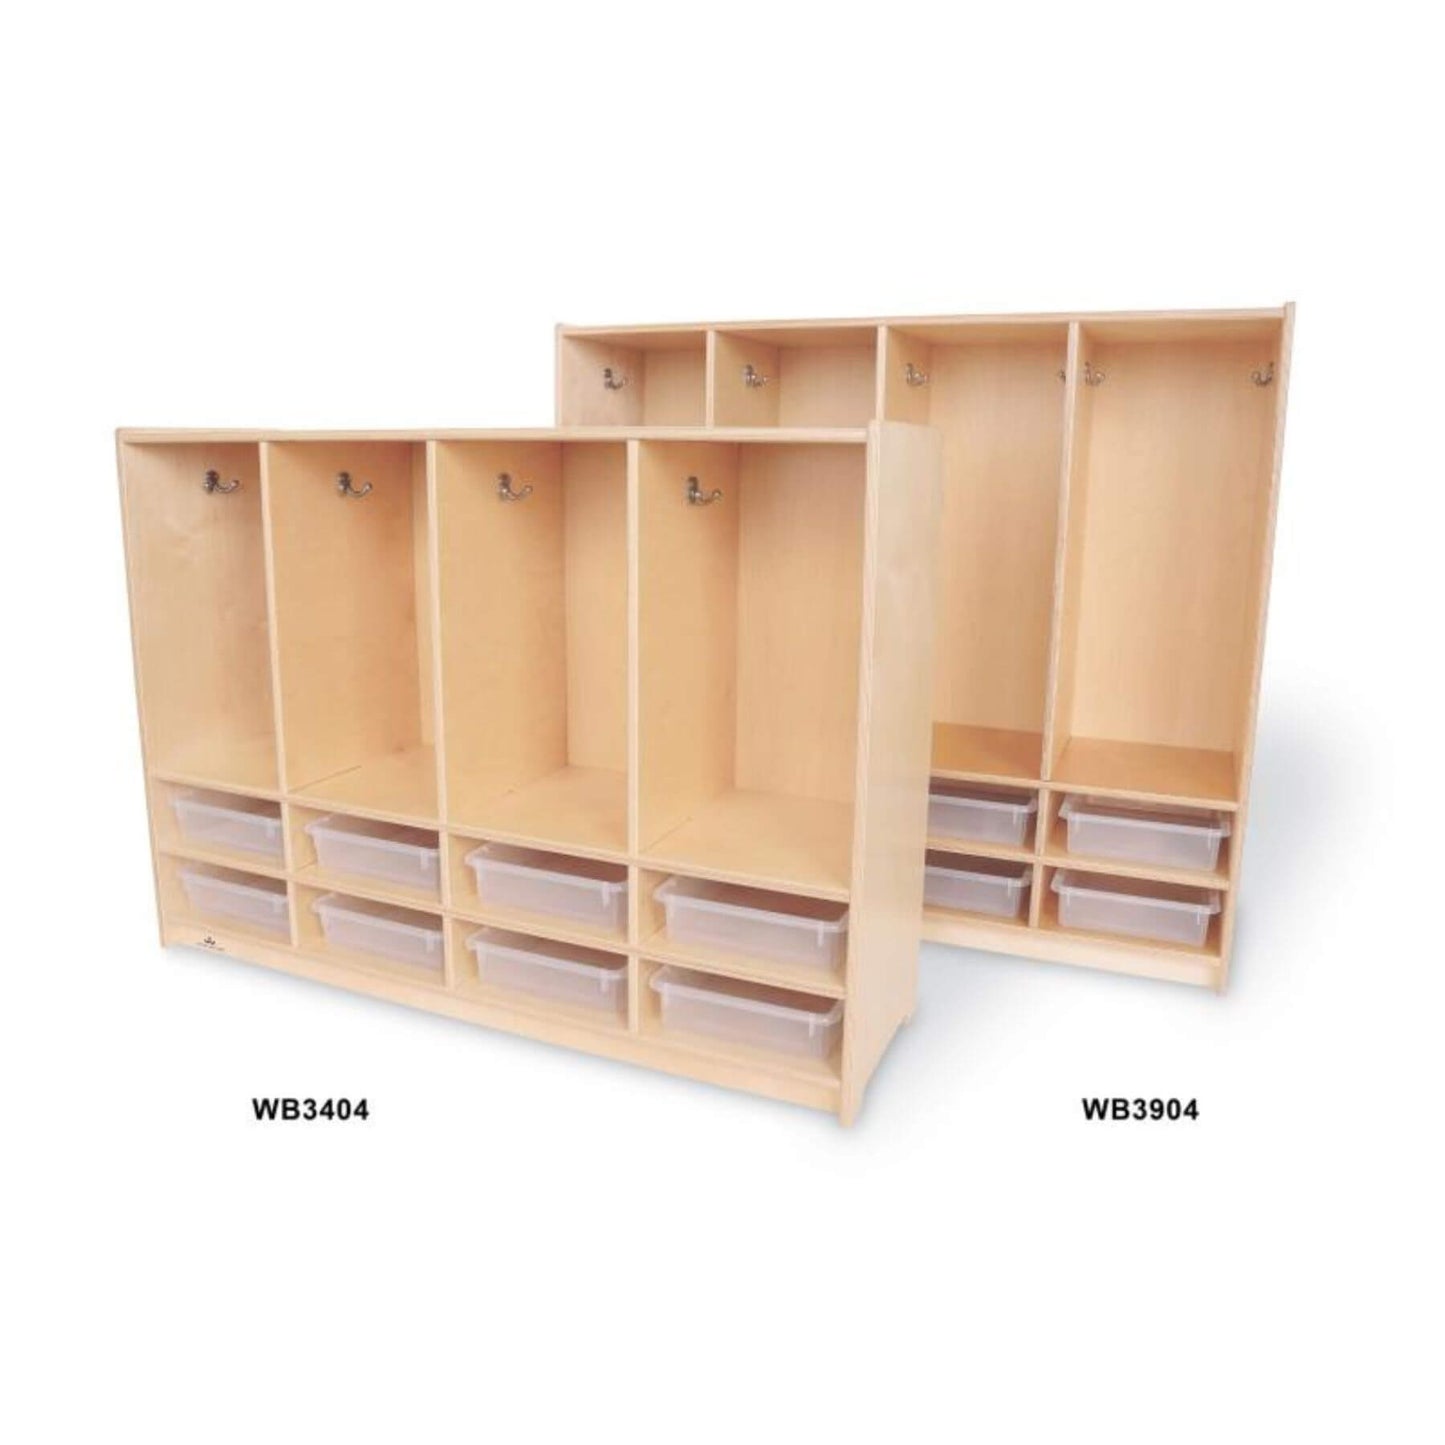 2 Sizes of Whitney Brothers Preschool 8 Section Coat Locker With Trays